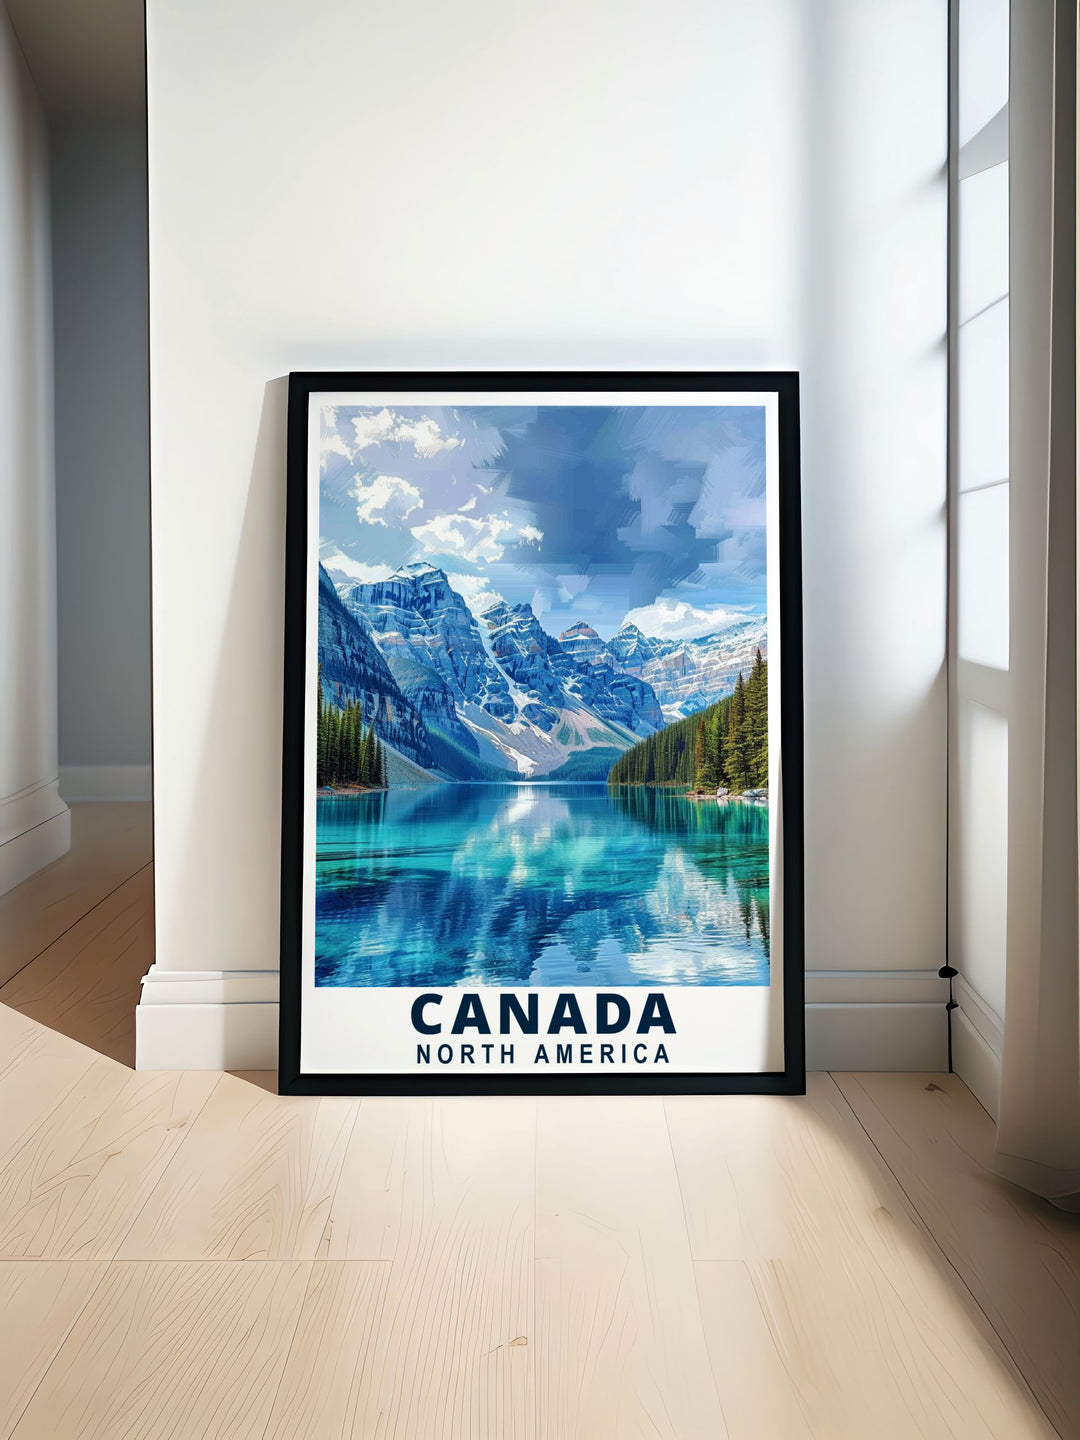 The picturesque scenery of Banff National Park and the iconic Lake Louise are featured in this vibrant travel poster, perfect for adding Canadas unique charm and heritage to your home.